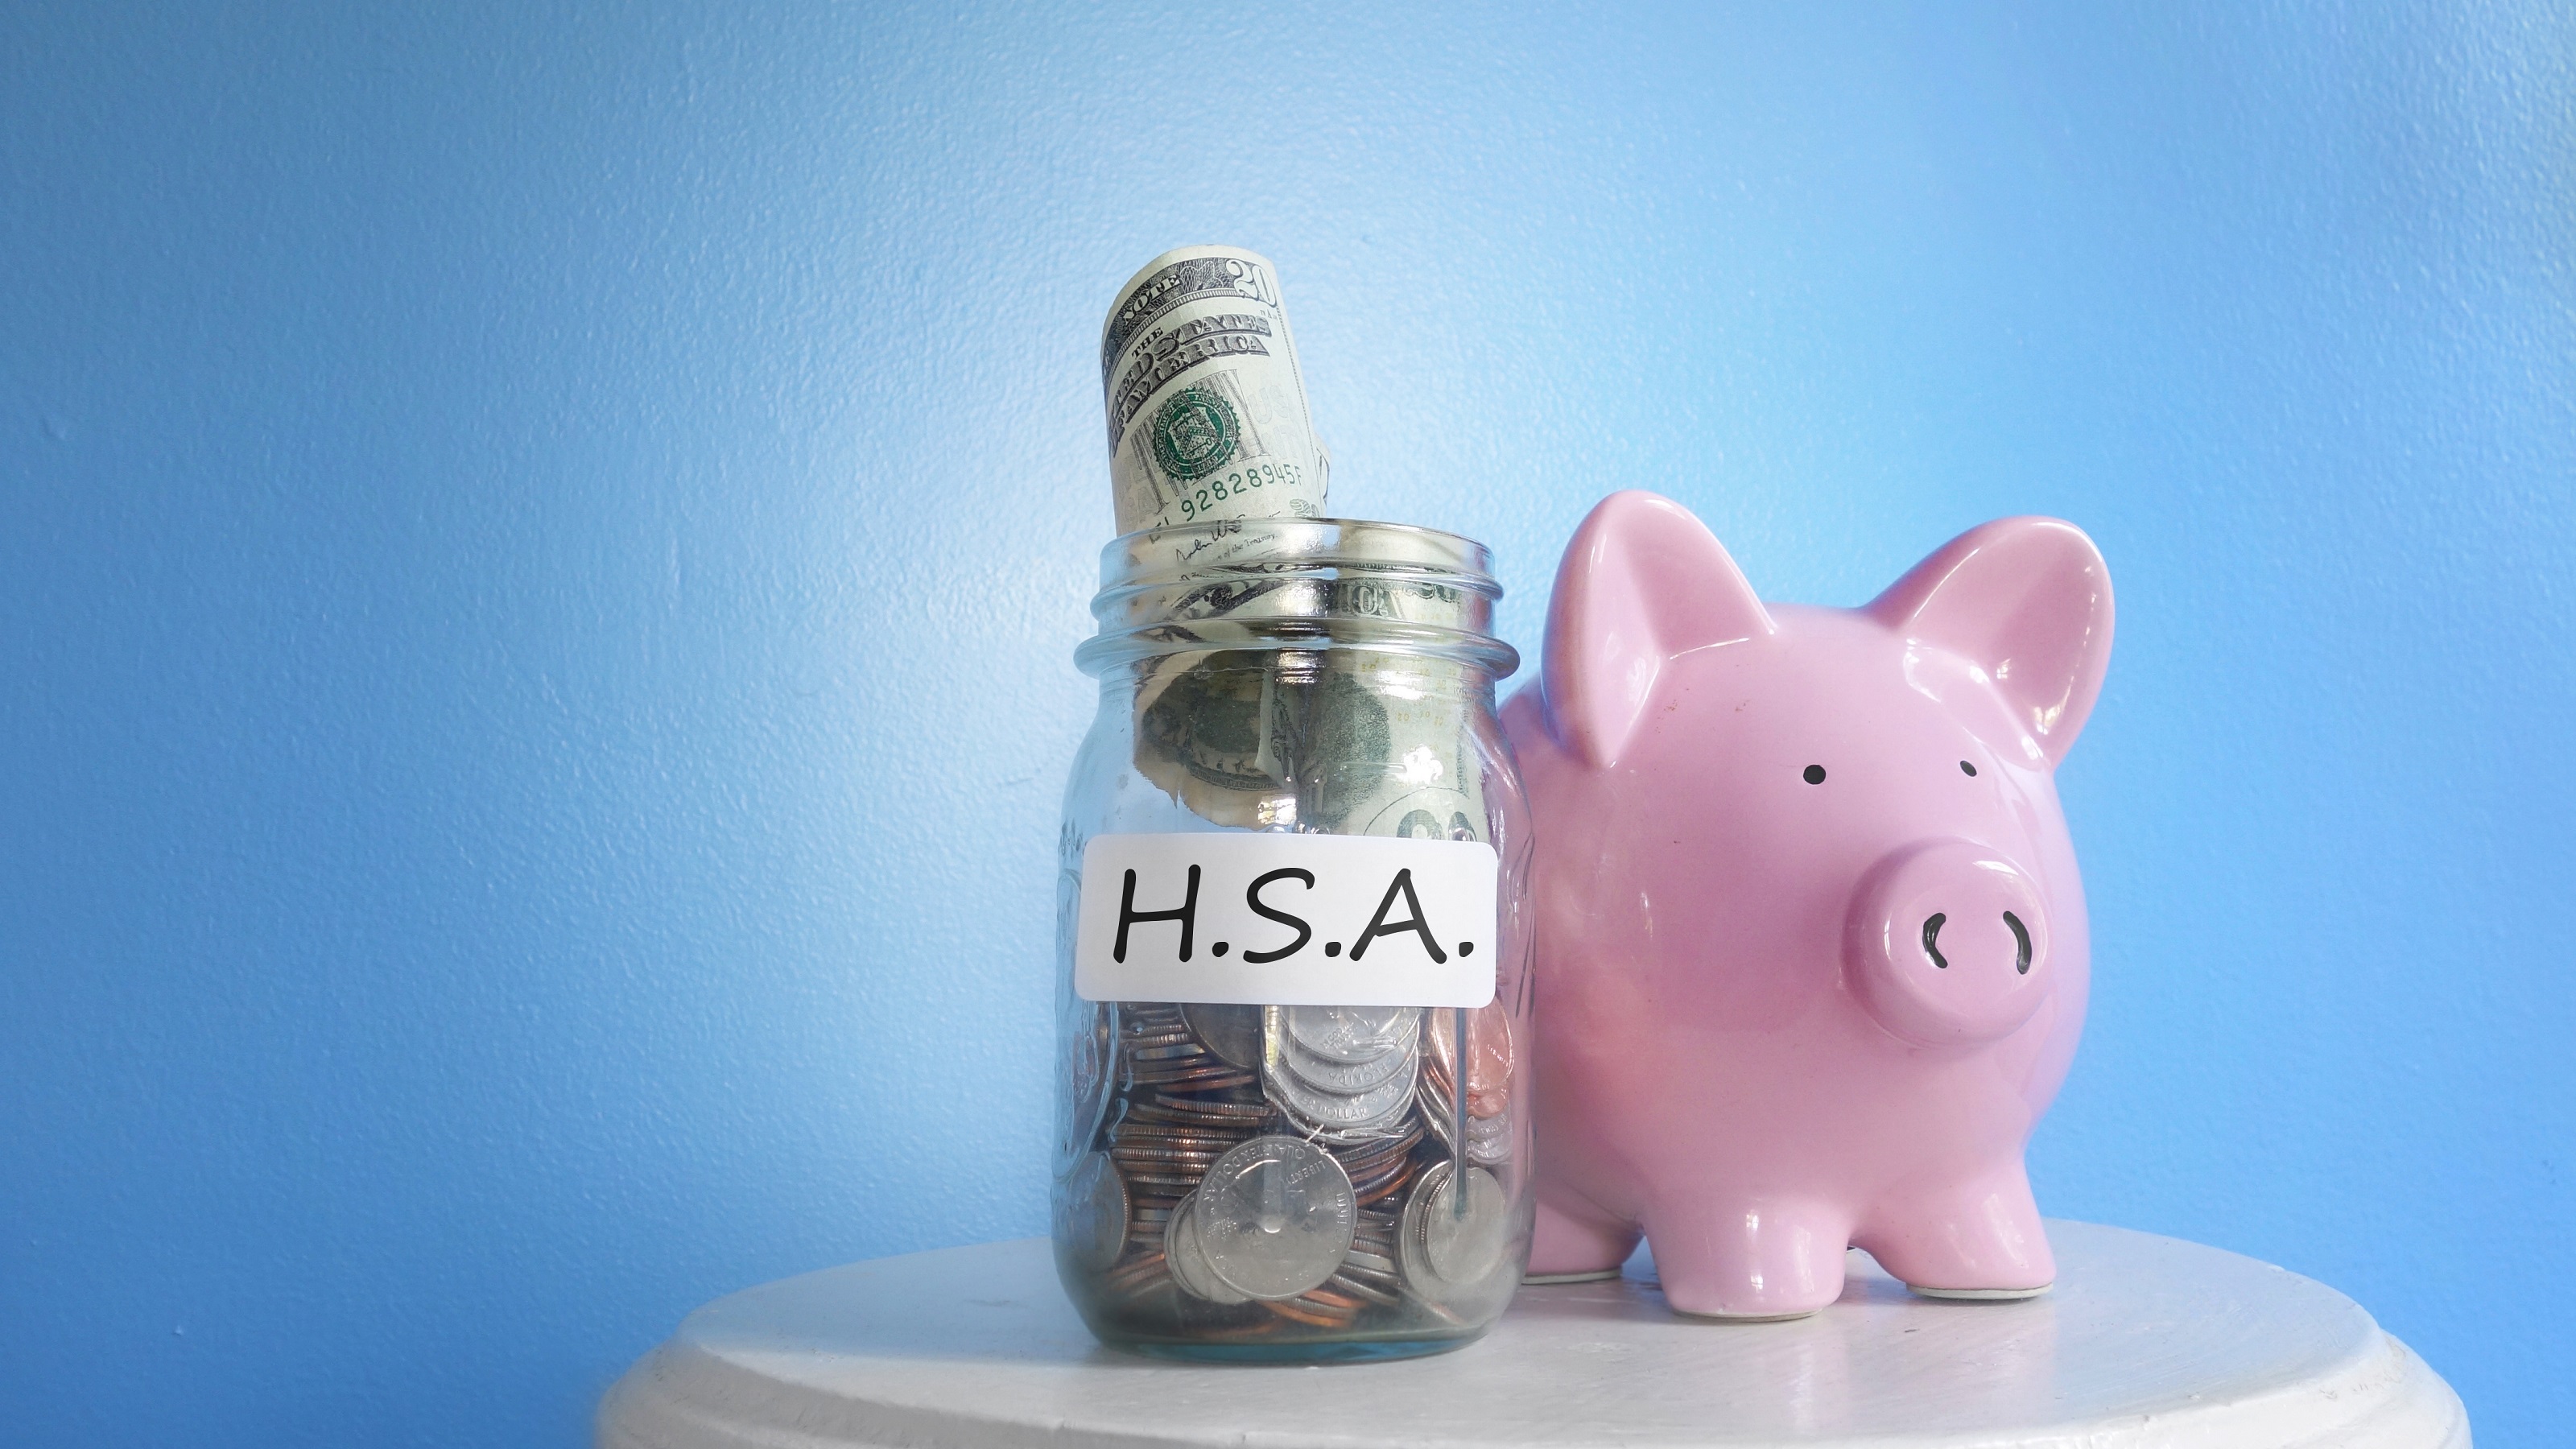 7 Purchases You May Not Know You Can Make With Your HSA Fund